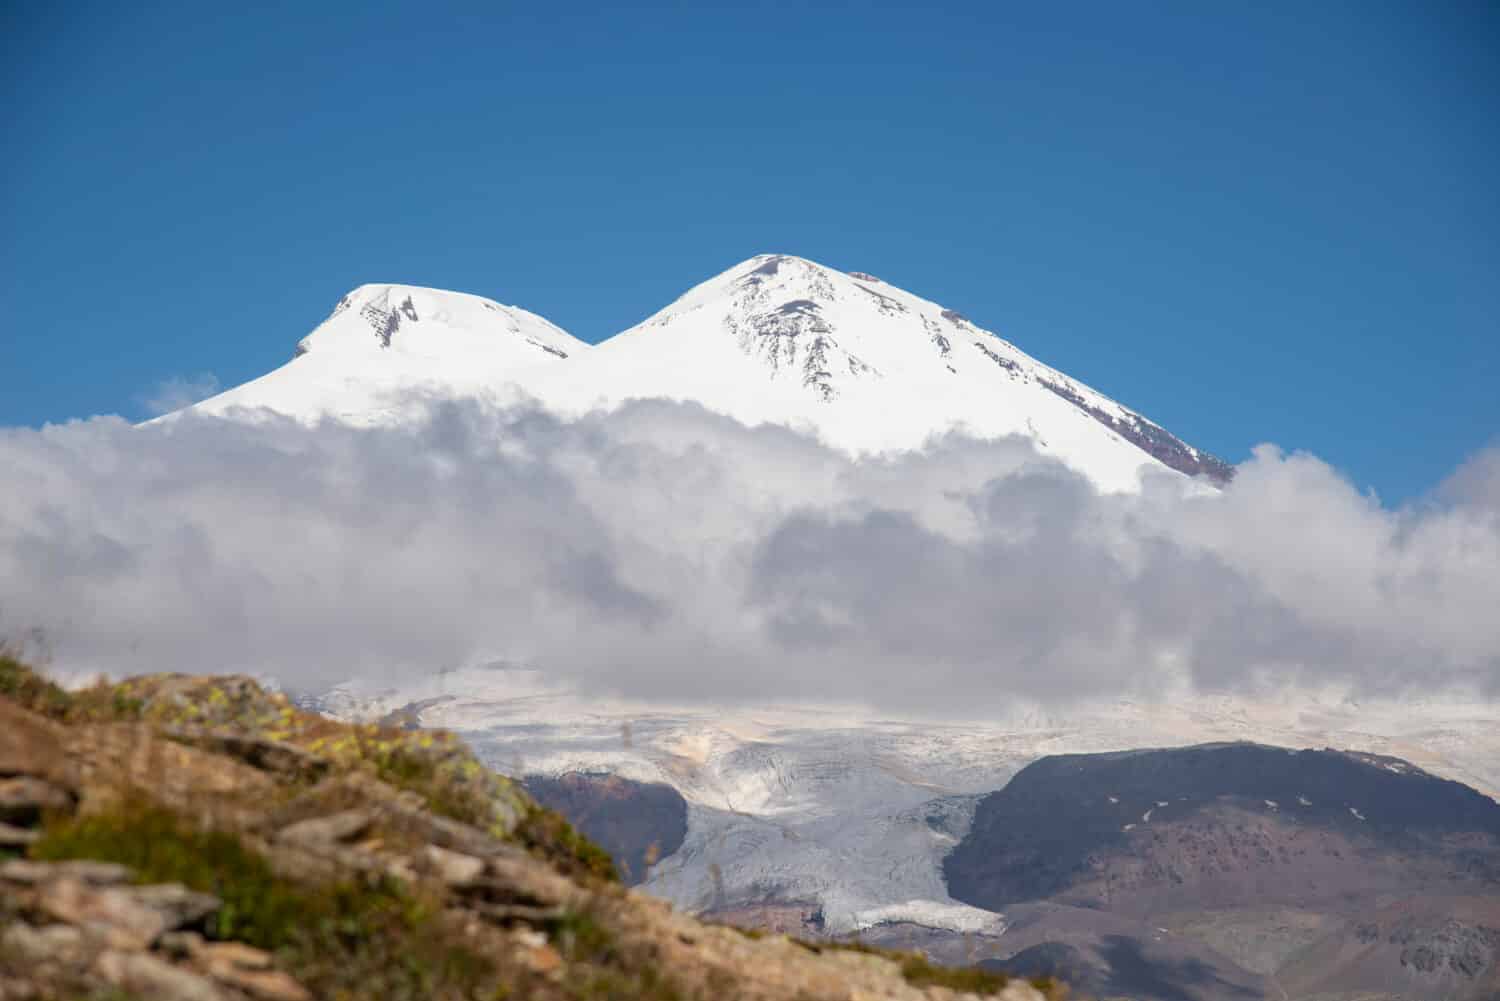 View of Mt Elbrus from Mount Cheget. Caucasus, Russian Federation